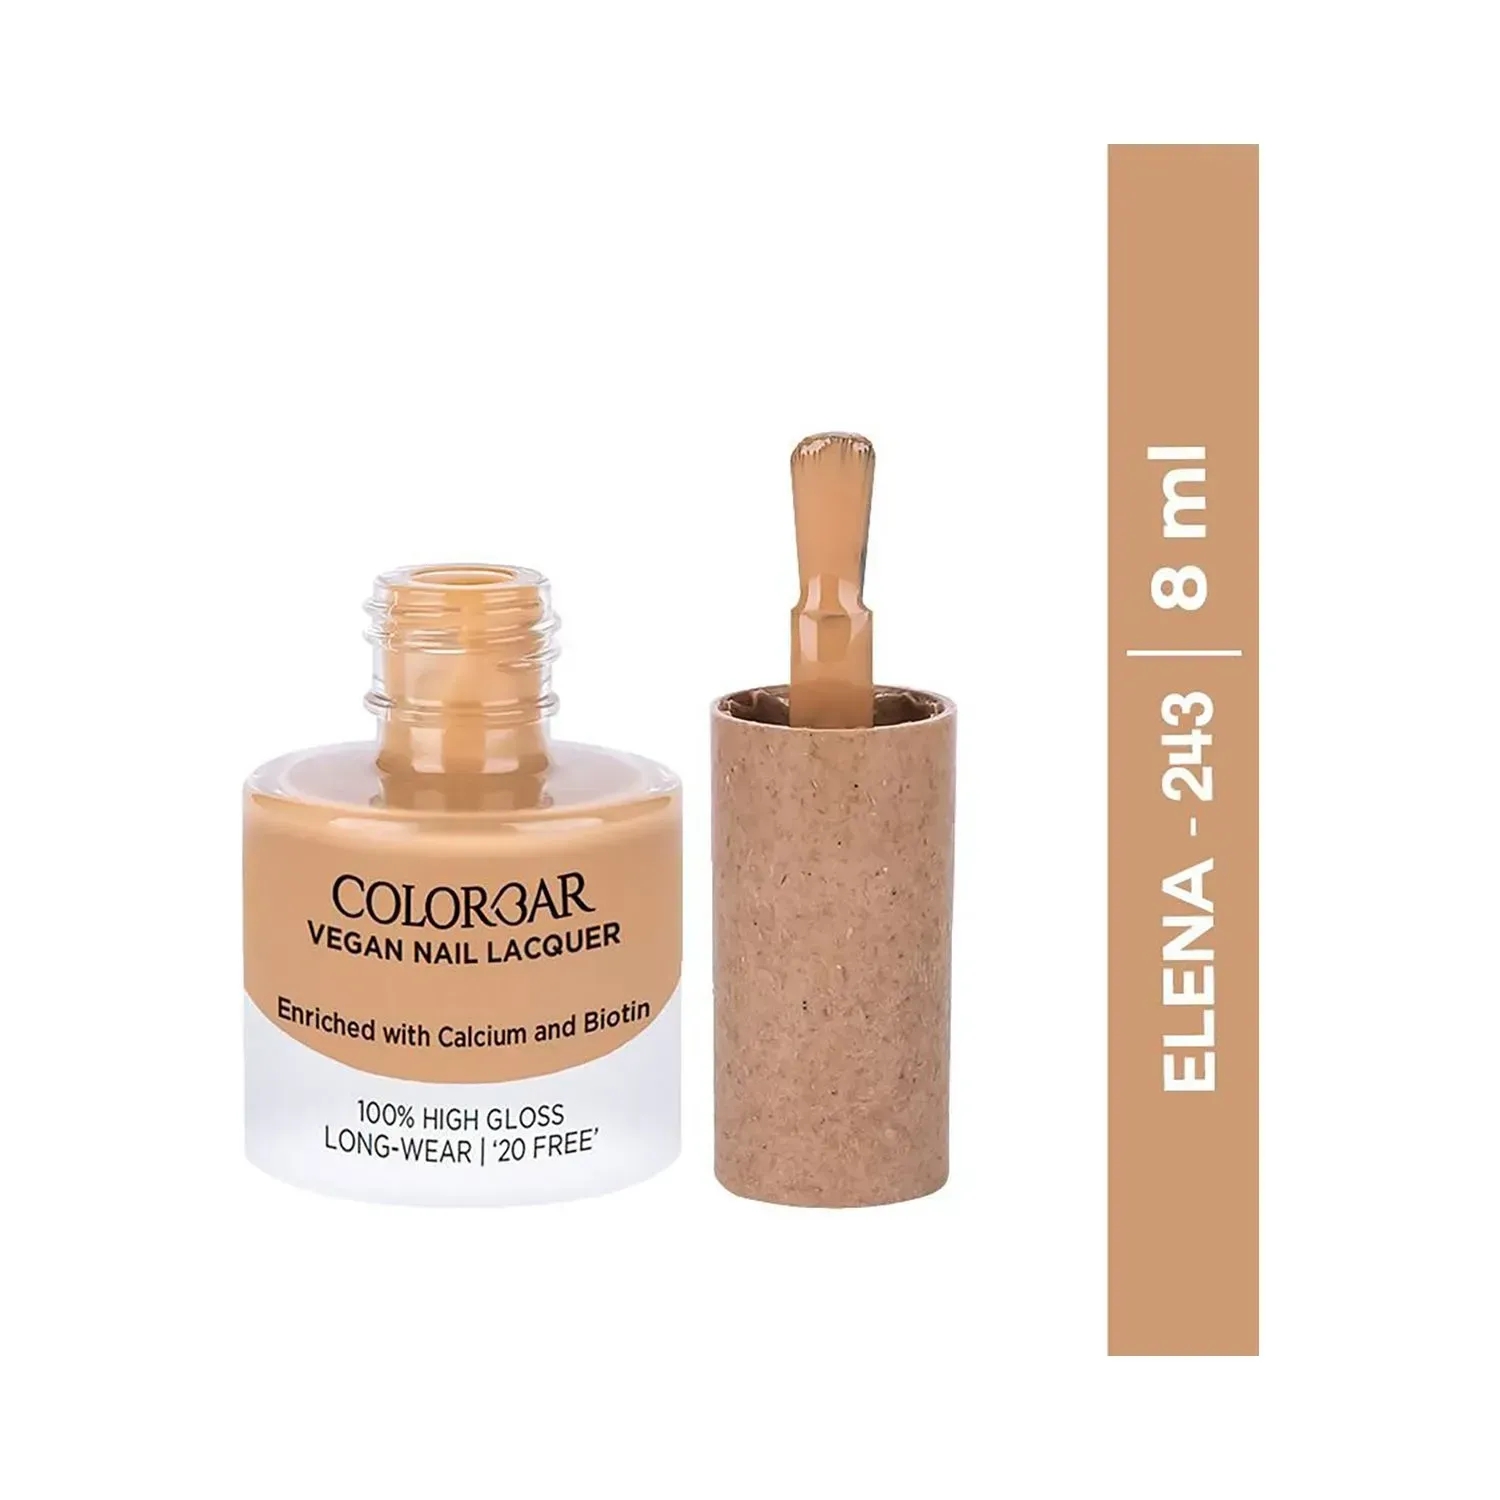 Buy Colorbar Vegan Nail Lacquer - Jewel Blue Online at Low Prices in India  - Amazon.in